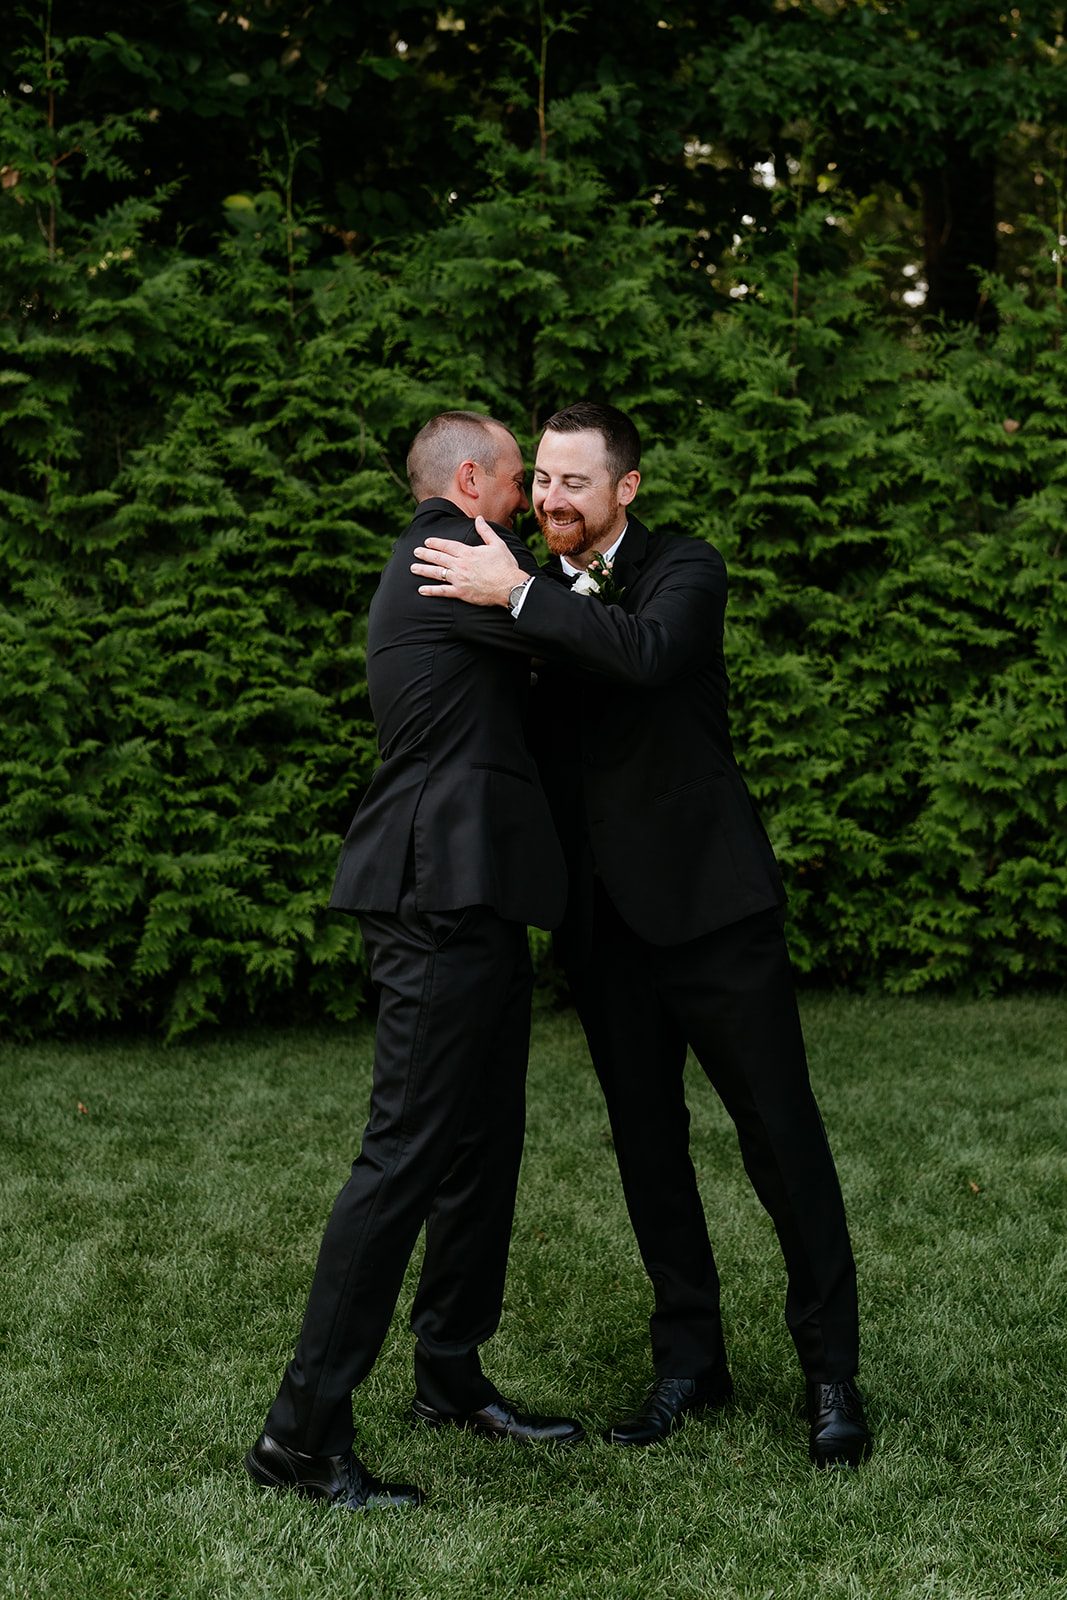 Two men in black suits embracing and smiling in front of a green, leafy backdrop at Lakeview Pavilion.